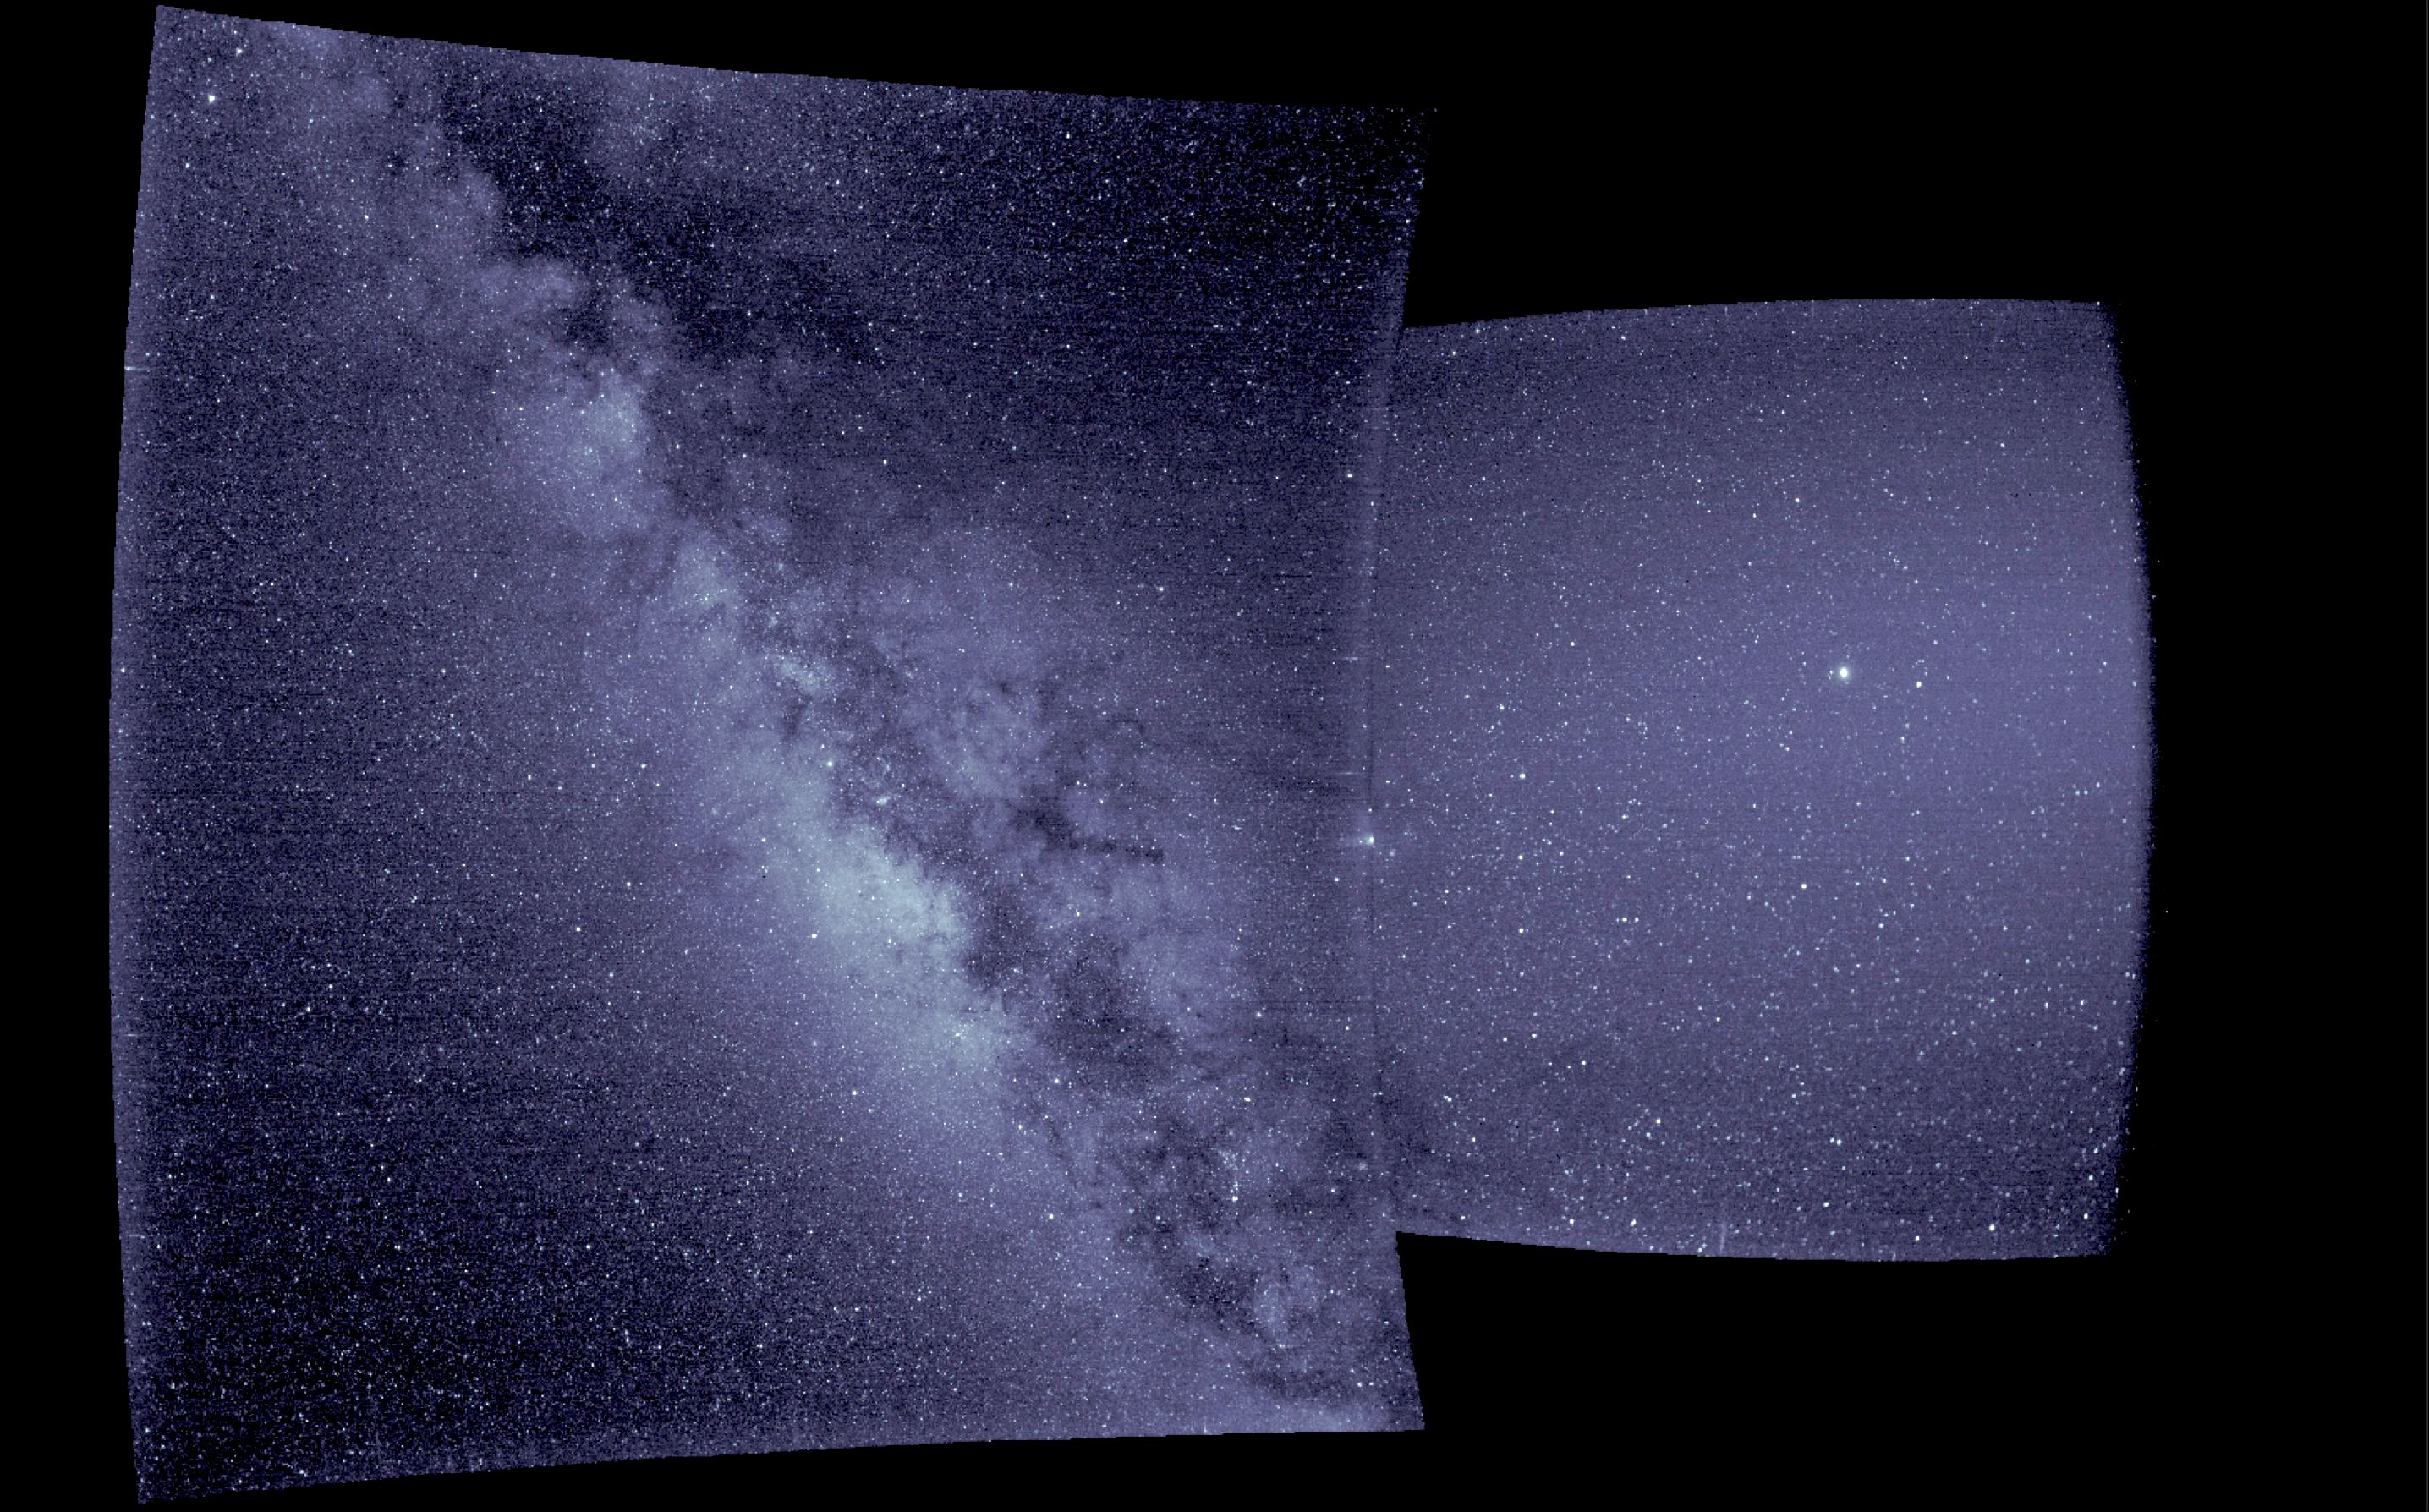 First light data from Parker Solar Probe's WISPR (Wide-field Imager for Solar Probe) instrument suite. The right side of this image — from WISPR's inner telescope — has a 40-degree field of view, with its right edge 58.5 degrees from the Sun's center. The bright object slightly to the right of the image's center is Jupiter. The left side of the image is from WISPR's outer telescope, which has a 58-degree field of view and extends to about 160 degrees from the Sun. There is a parallax of about 13 degrees in the apparent position of the Sun as viewed from Earth and from Parker Solar Probe.